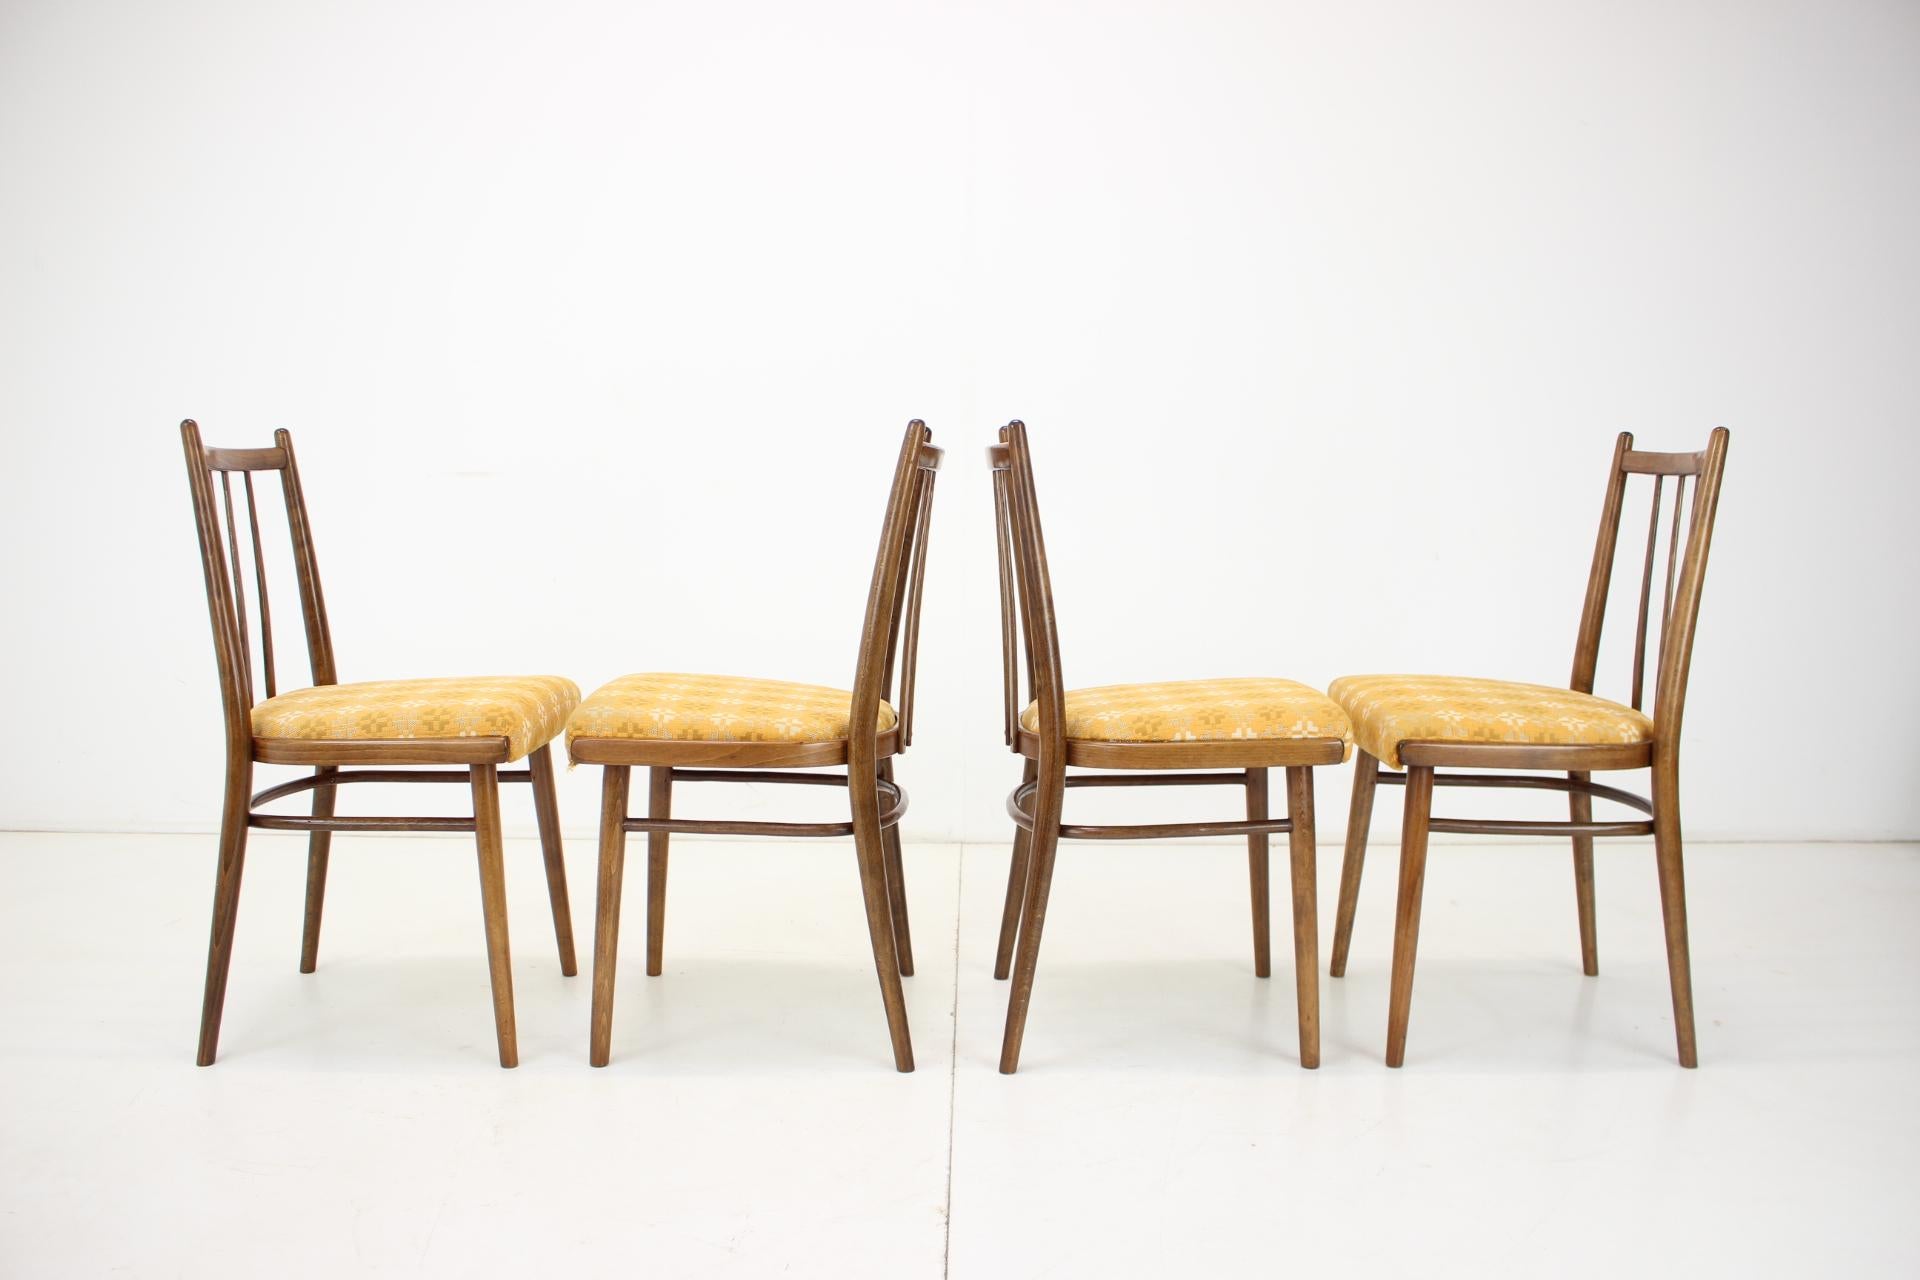 1970s Set of Four Dining Chairs by Jitona, Czechoslovakia For Sale 2